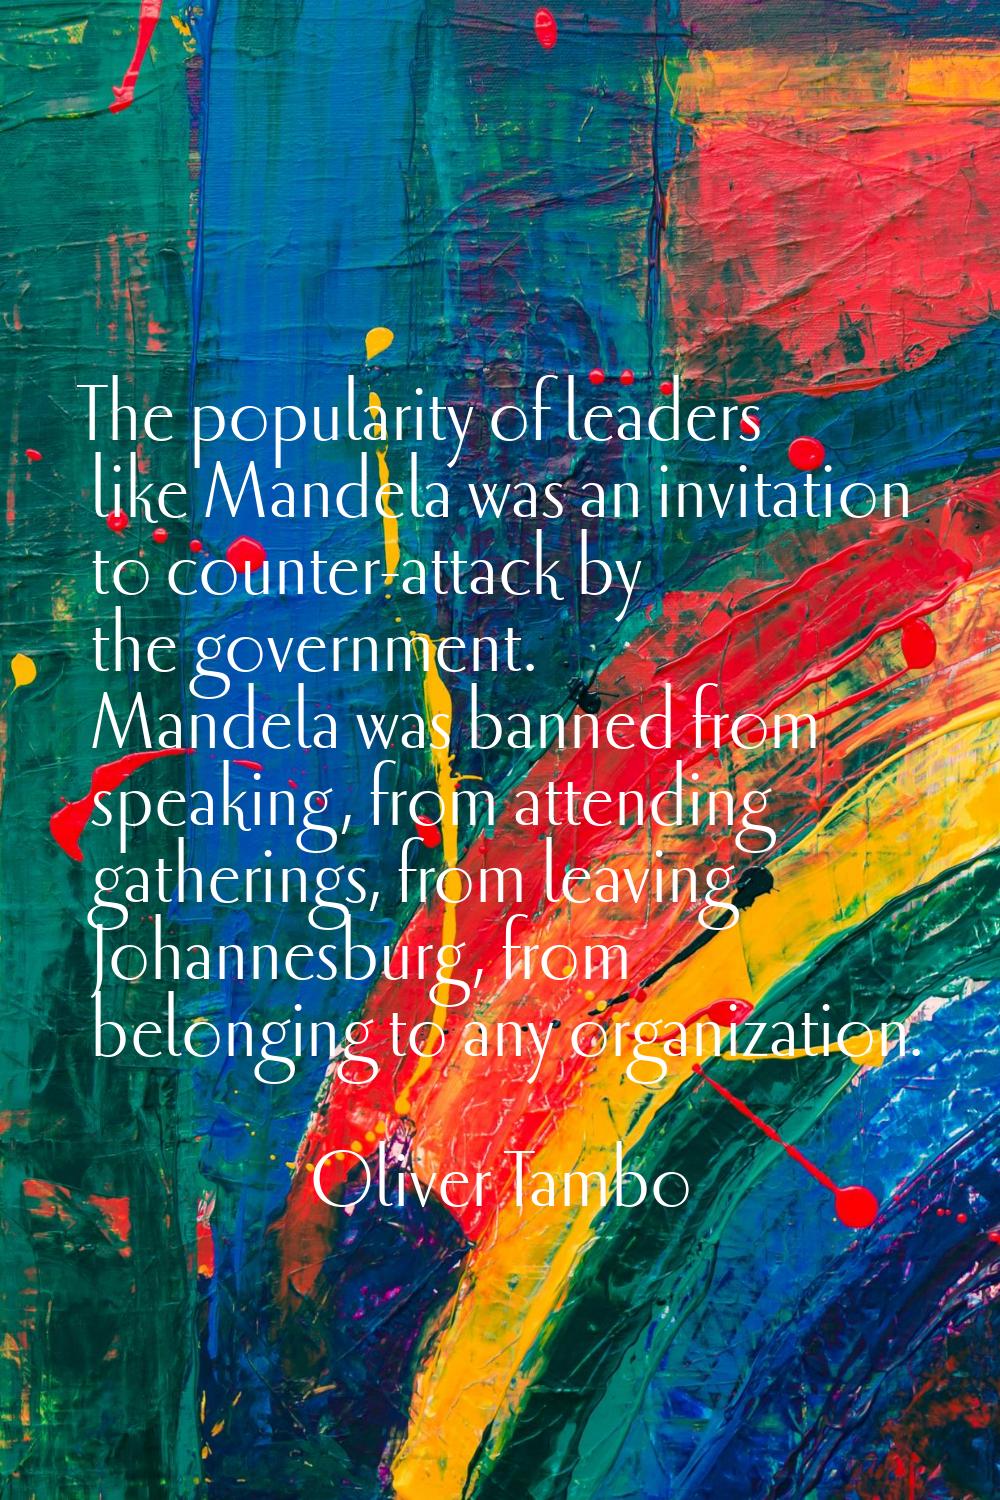 The popularity of leaders like Mandela was an invitation to counter-attack by the government. Mande